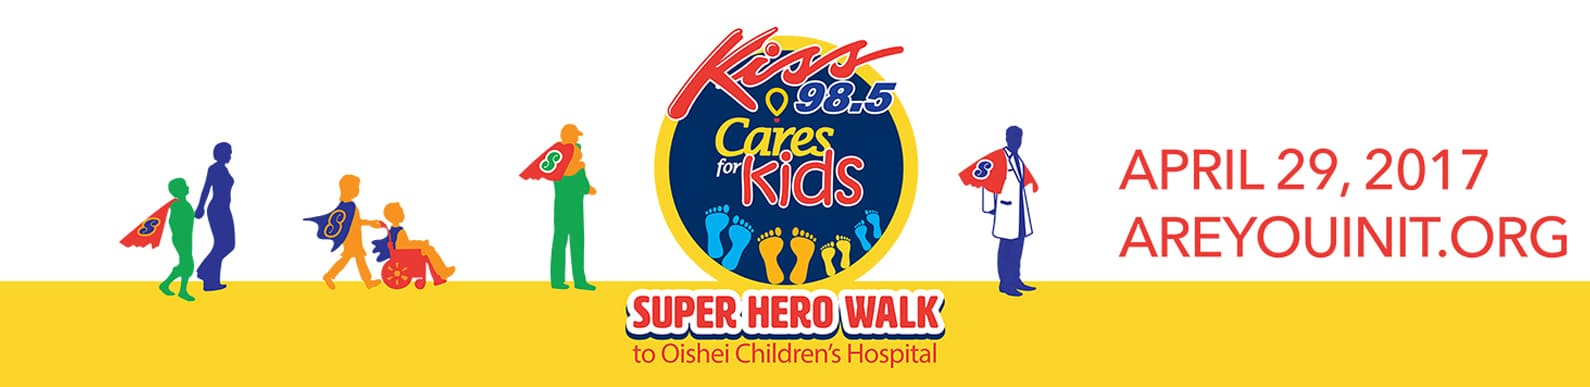 Superhero walk will be epic as Children’s Hospital prepares for new home